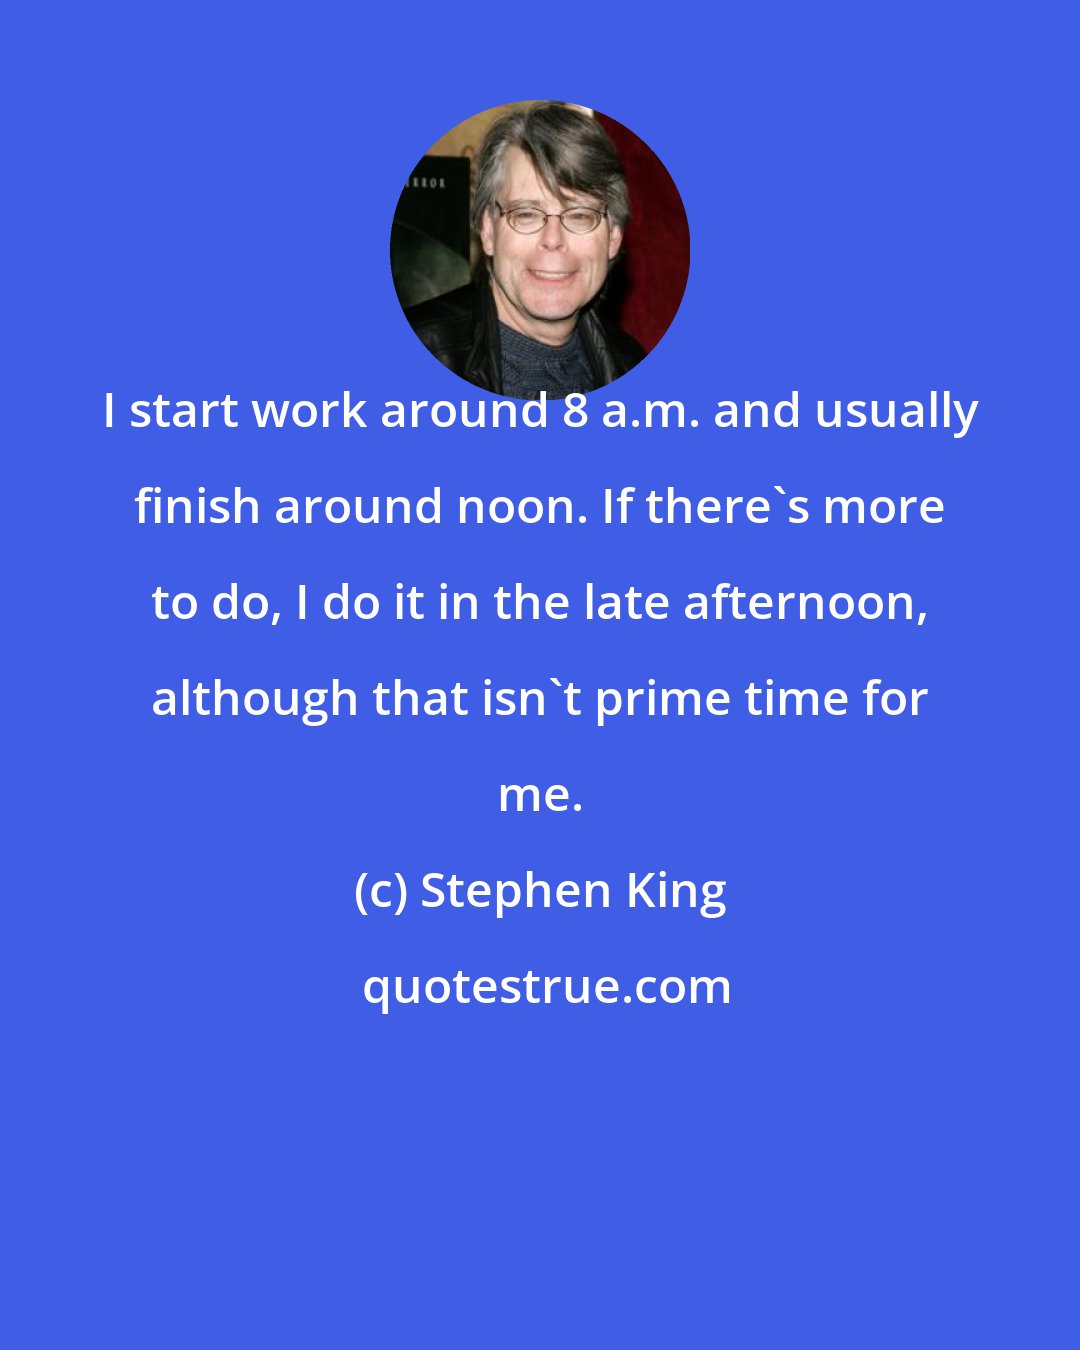 Stephen King: I start work around 8 a.m. and usually finish around noon. If there's more to do, I do it in the late afternoon, although that isn't prime time for me.